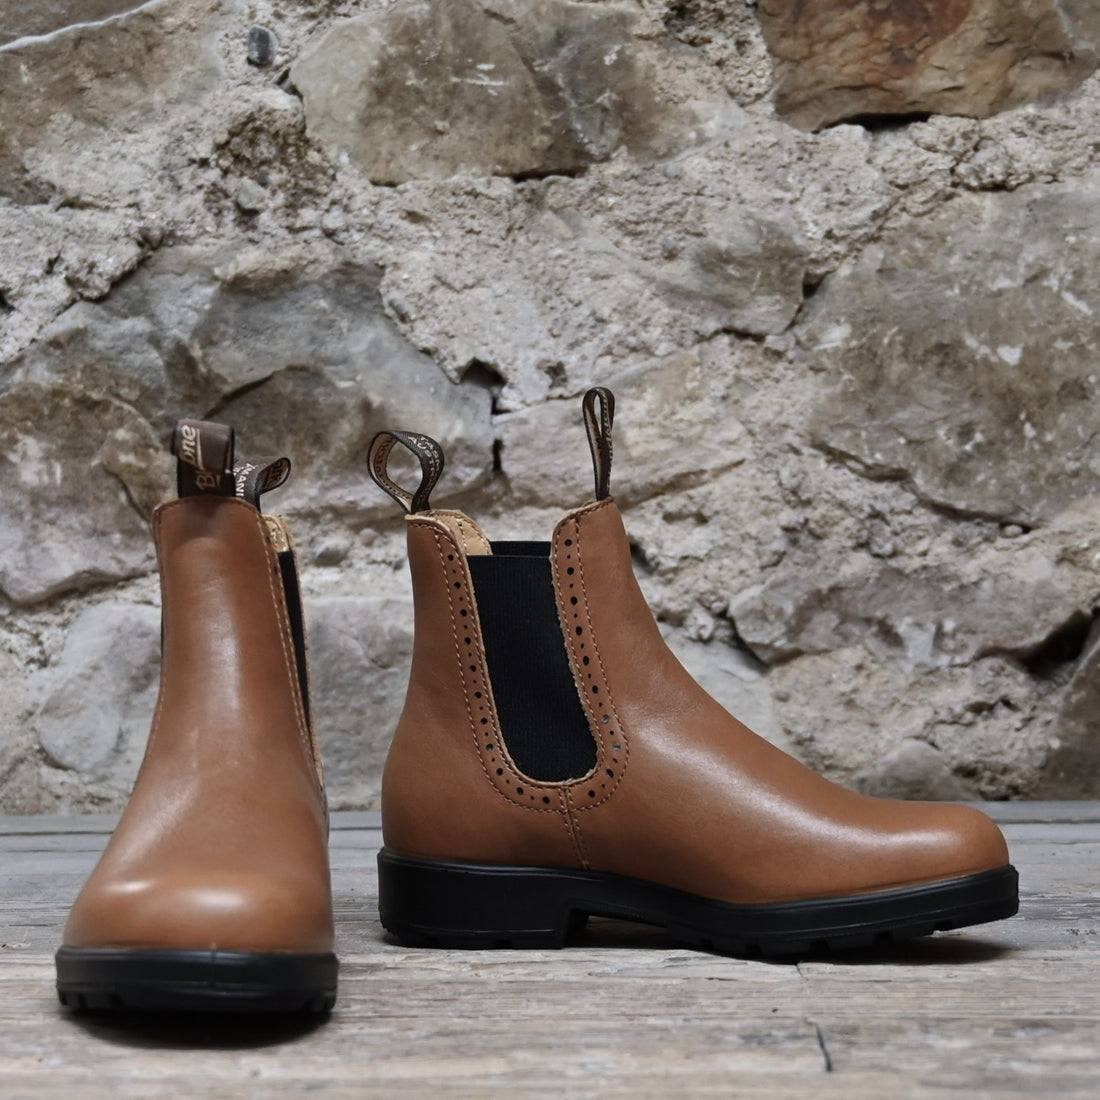 Blundstone Slip On in Camel view of front and side